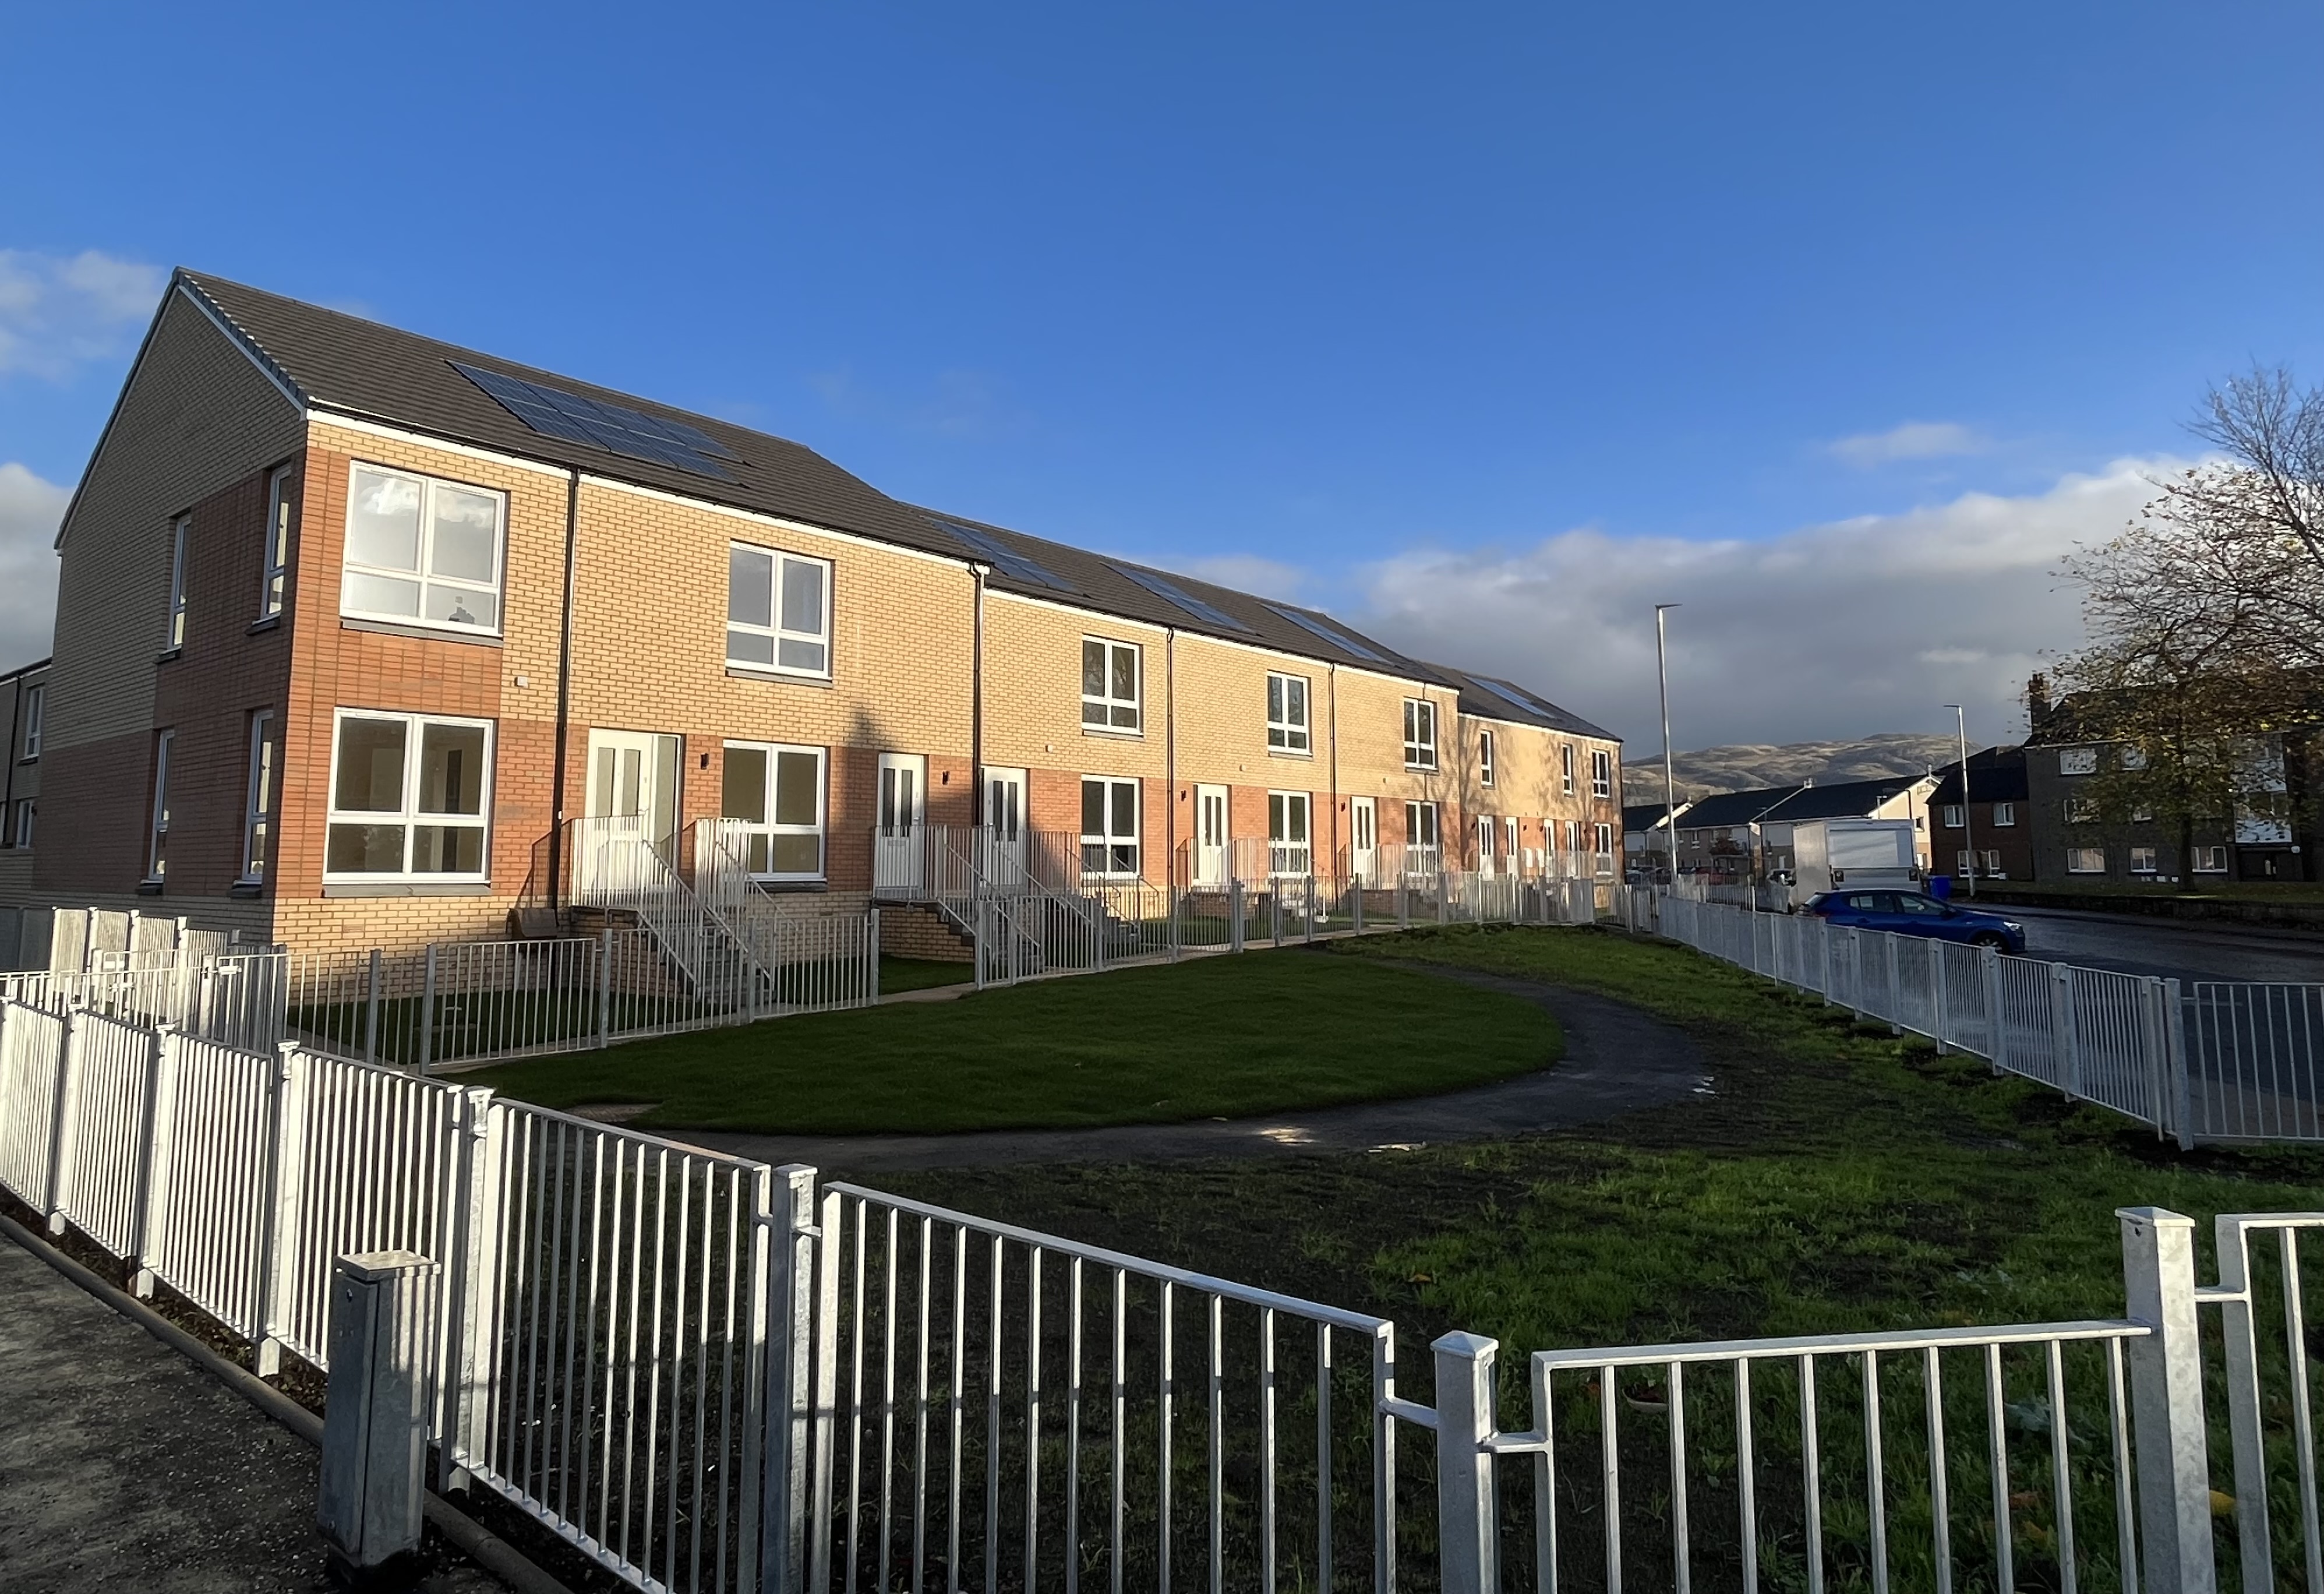 Forth Housing Association completes 24 new homes in Cornton